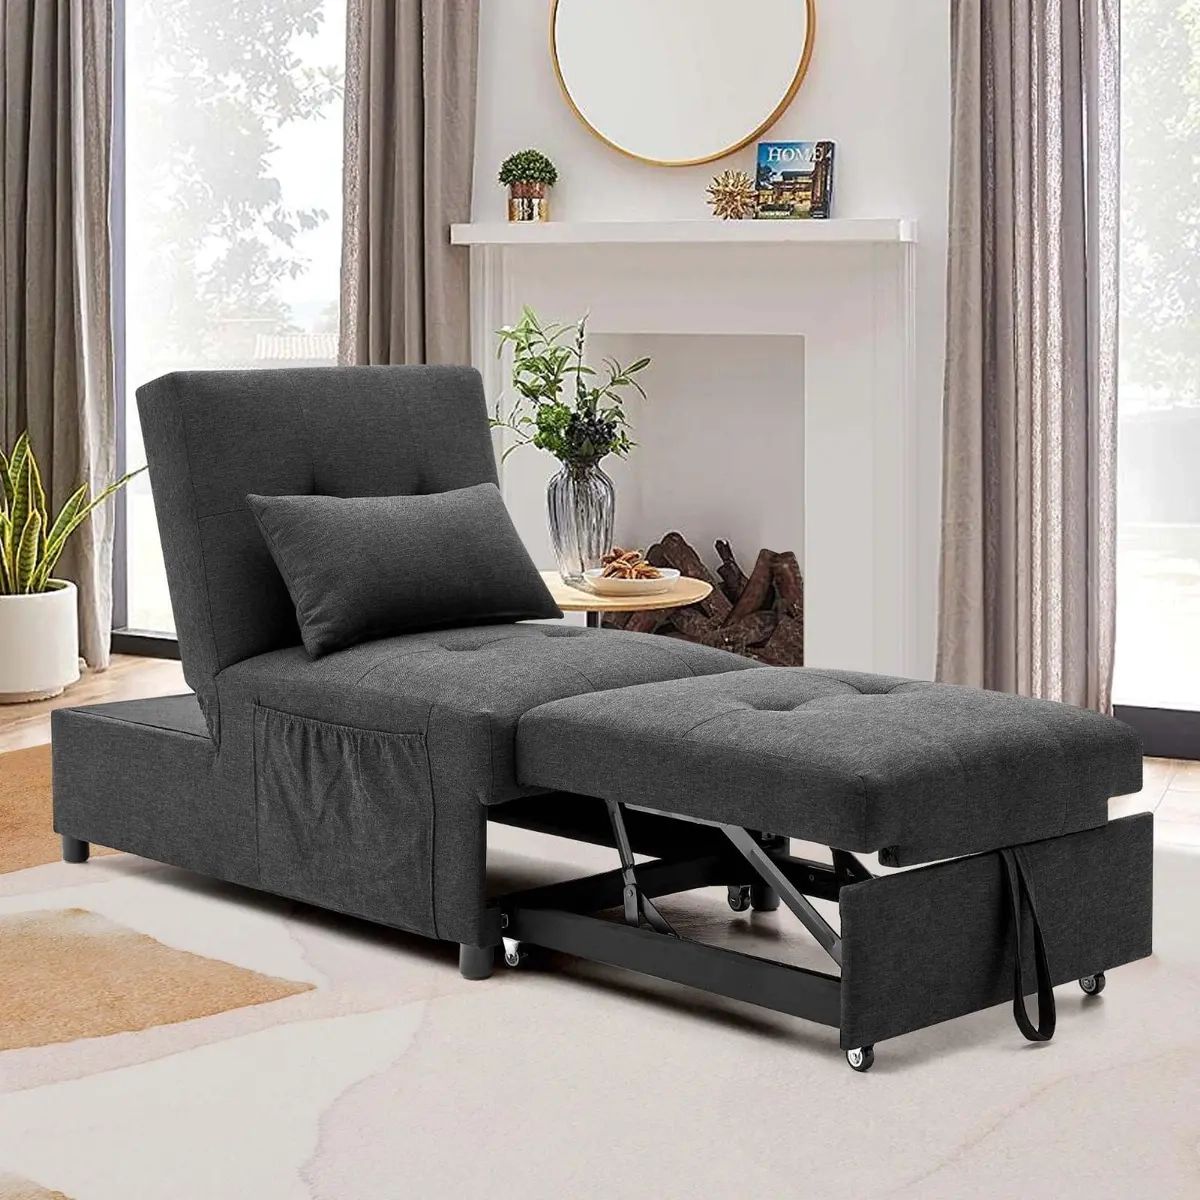 Convertible Sofa Chair Futon Bed 4 In 1 Pull Out Sleeper Chaise Home  Furniture | Ebay Throughout 4 In 1 Convertible Sleeper Chair Beds (View 3 of 15)